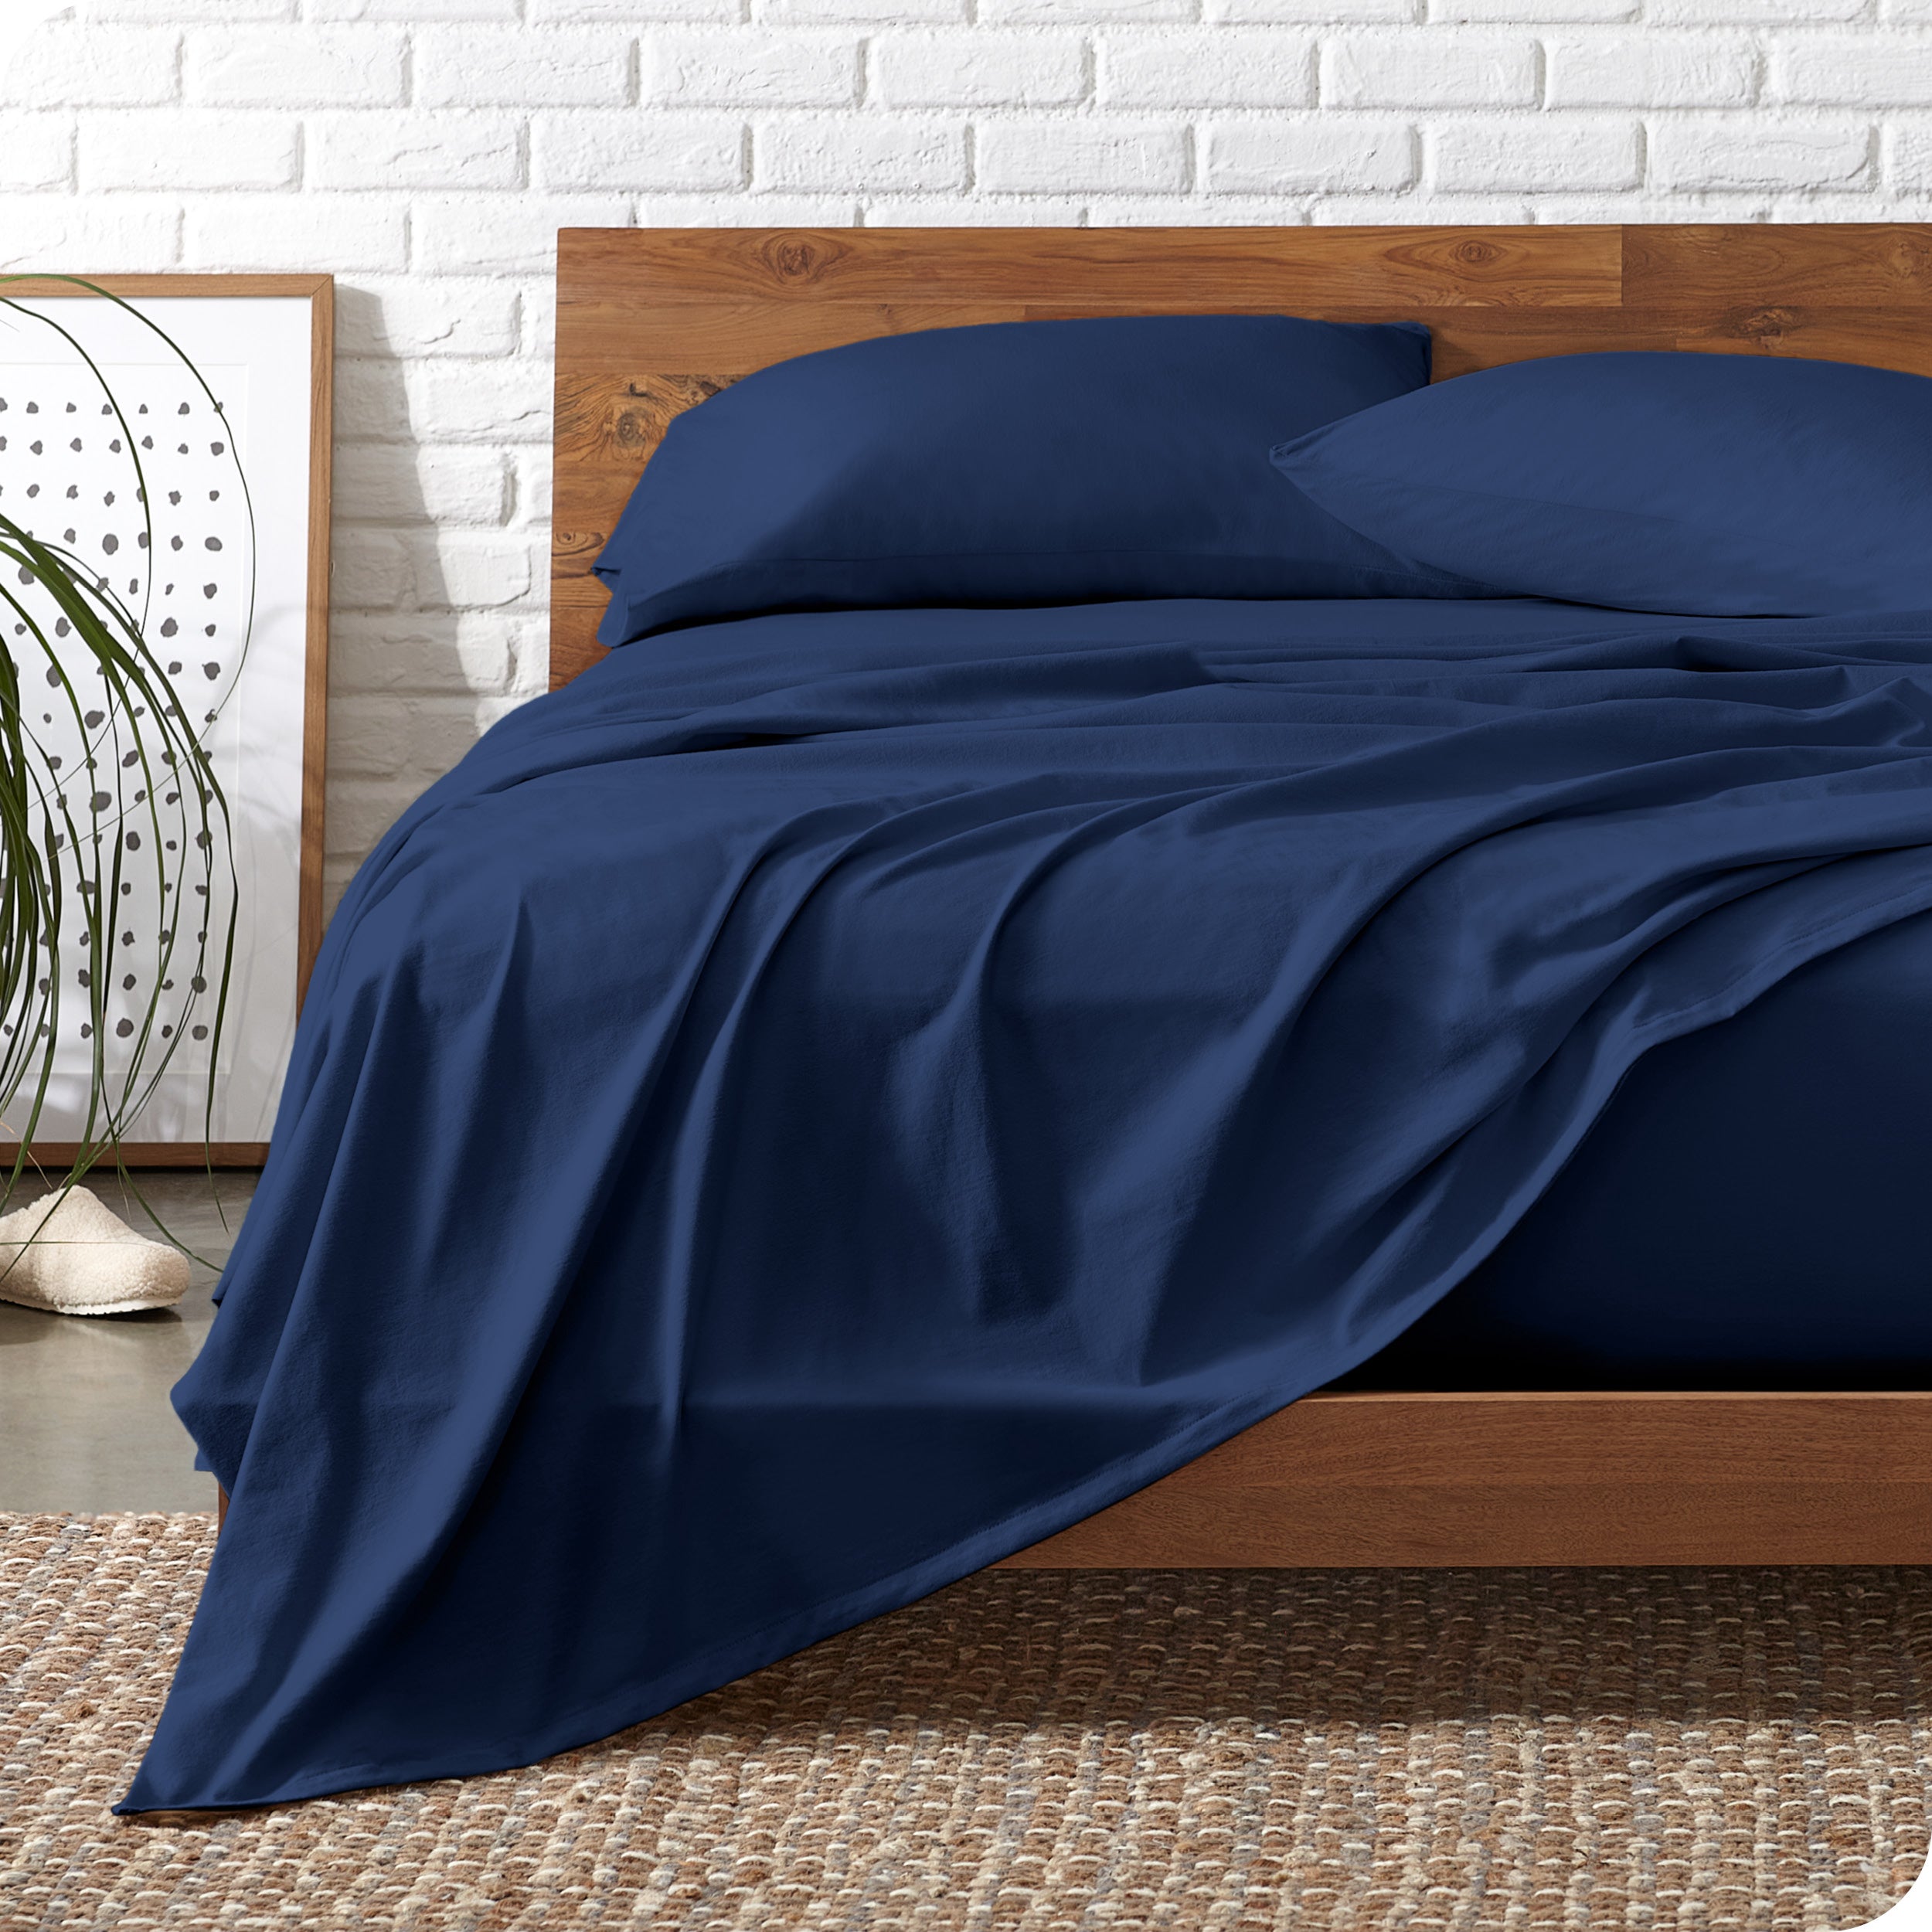 Wooden bed frame with dark blue organic cotton jersey sheets on the bed